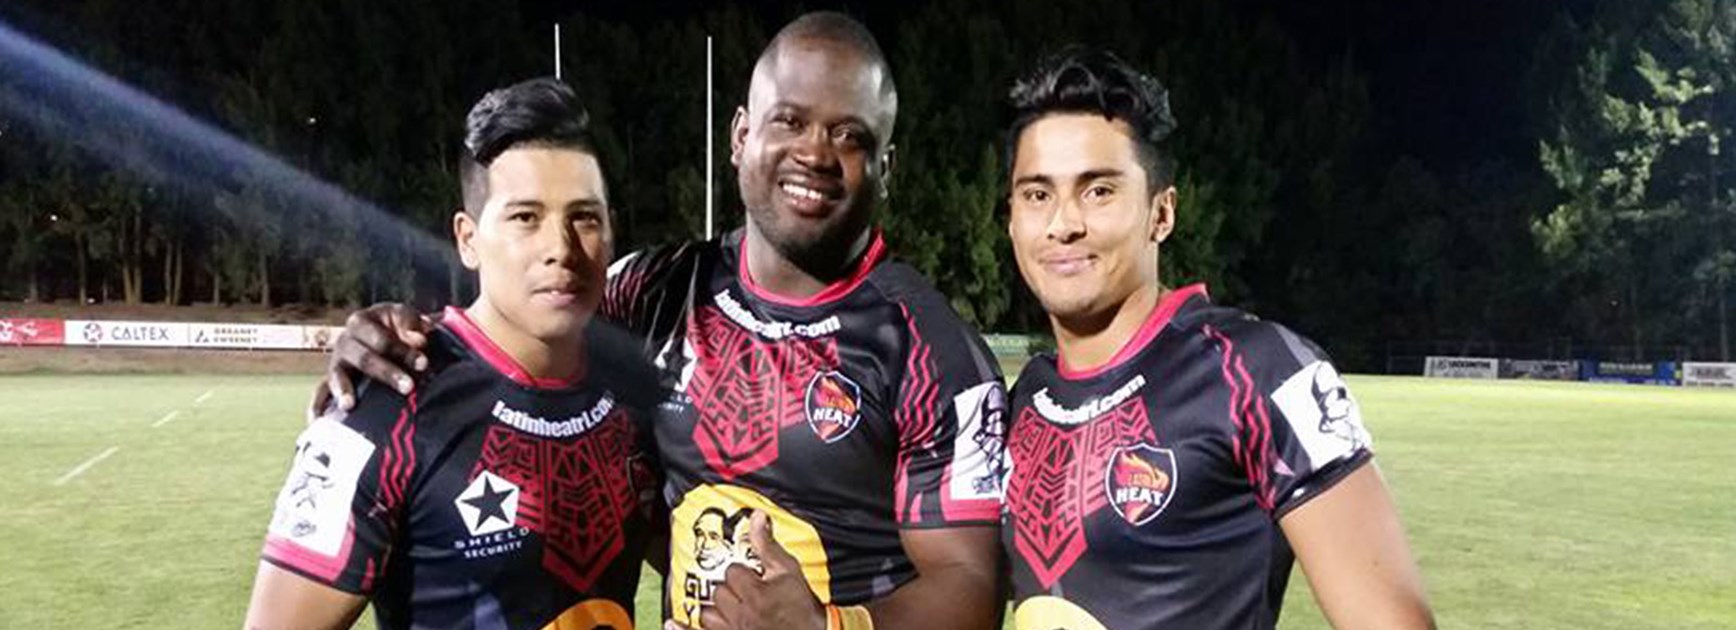 Four-try hero Kevin McKenzie (centre) with Latin Heat debutants Michael and Alvaro Alarcon after their win over Thailand last weekend.